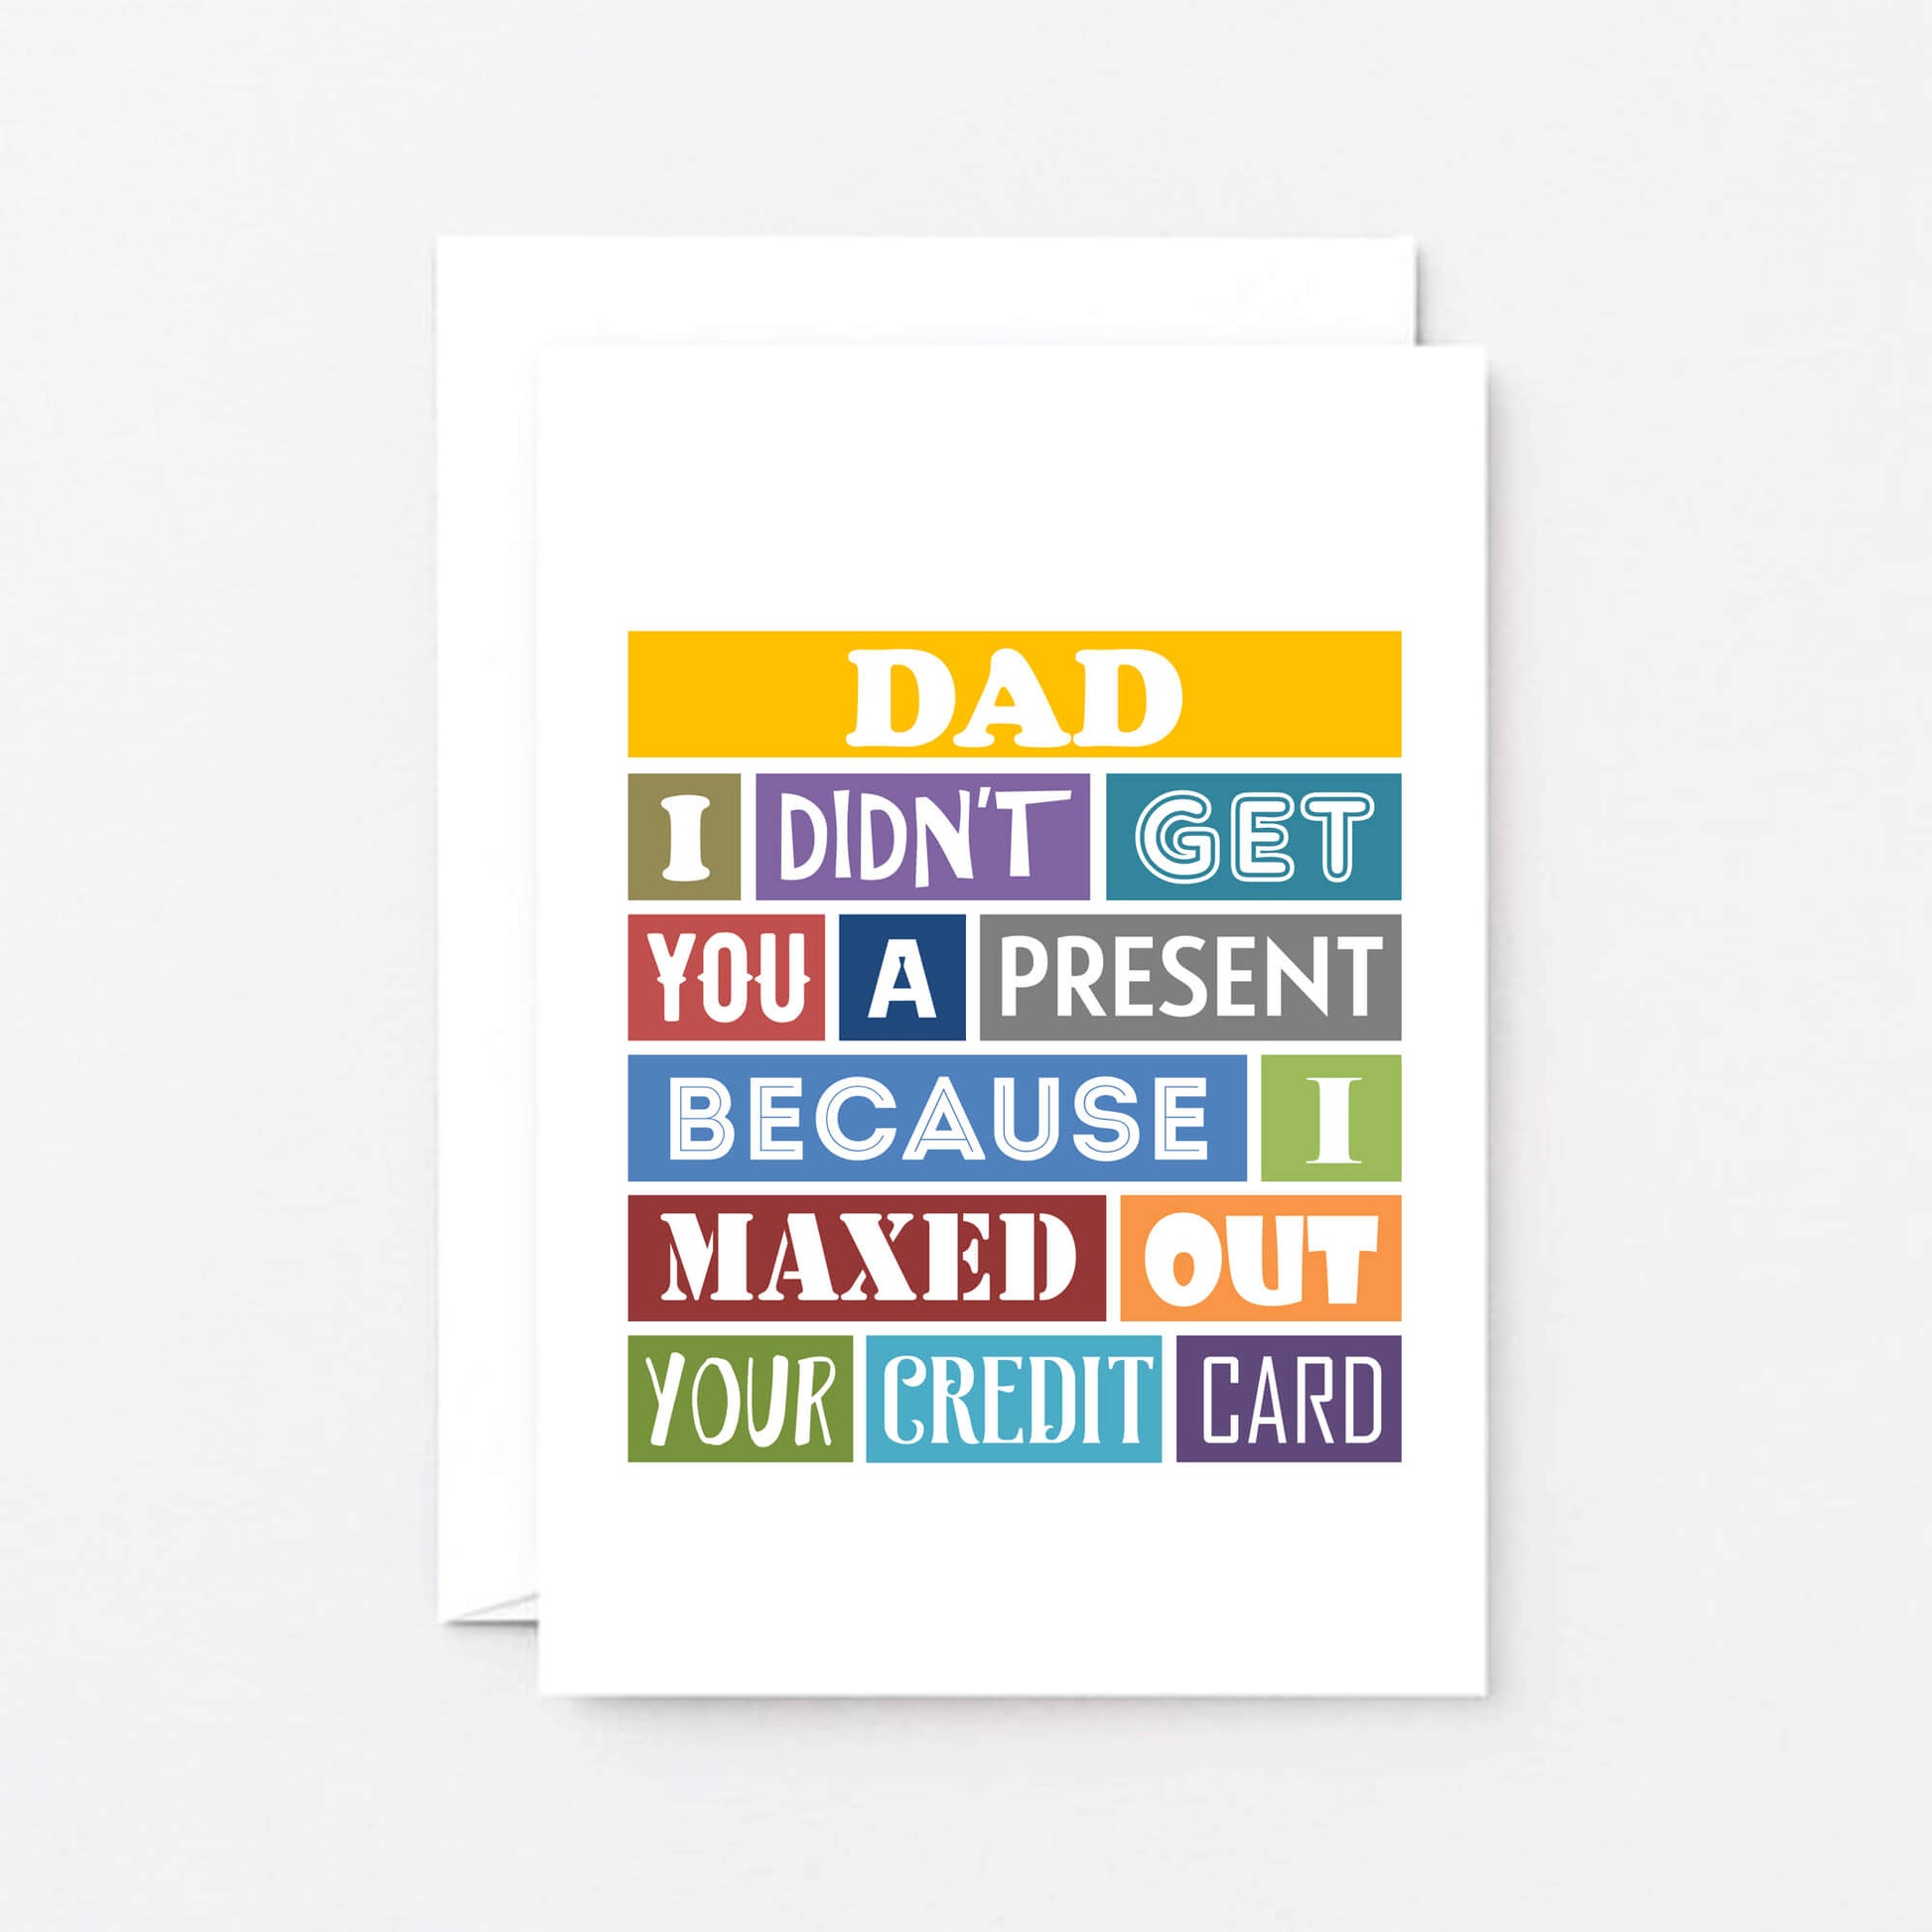 Dad Card by SixElevenCreations. Reads Dad I didn't get you a present because I maxed out your credit card. Product Code SE0135A6